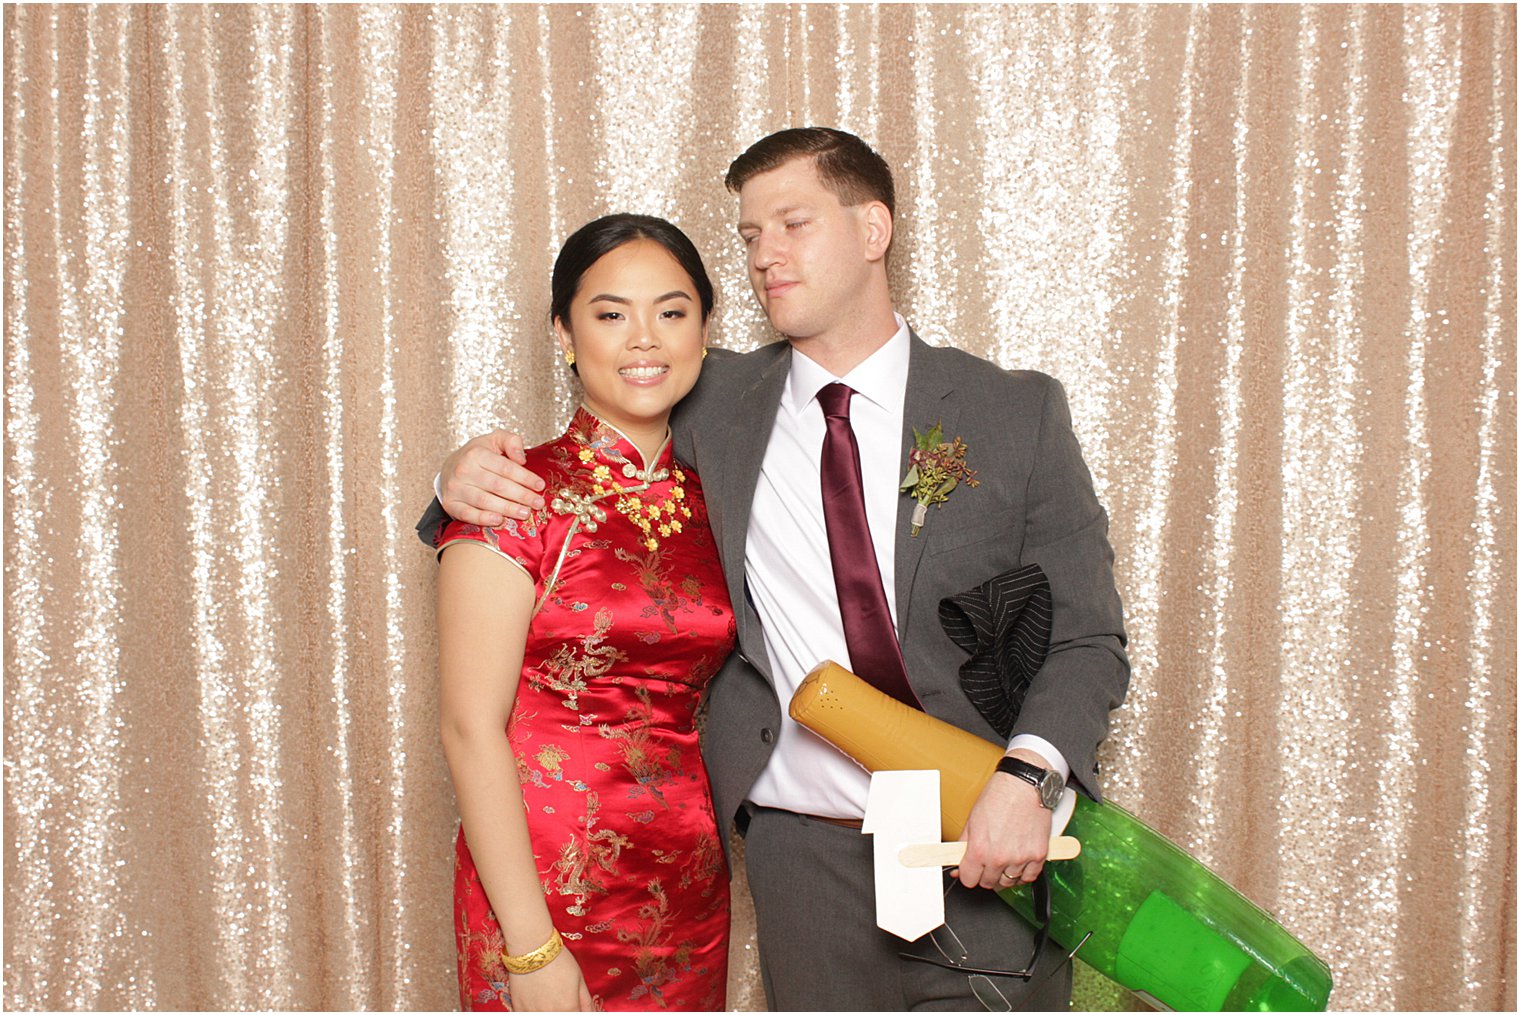 newlyweds pose in photo booth before Park Chateau Estate reception